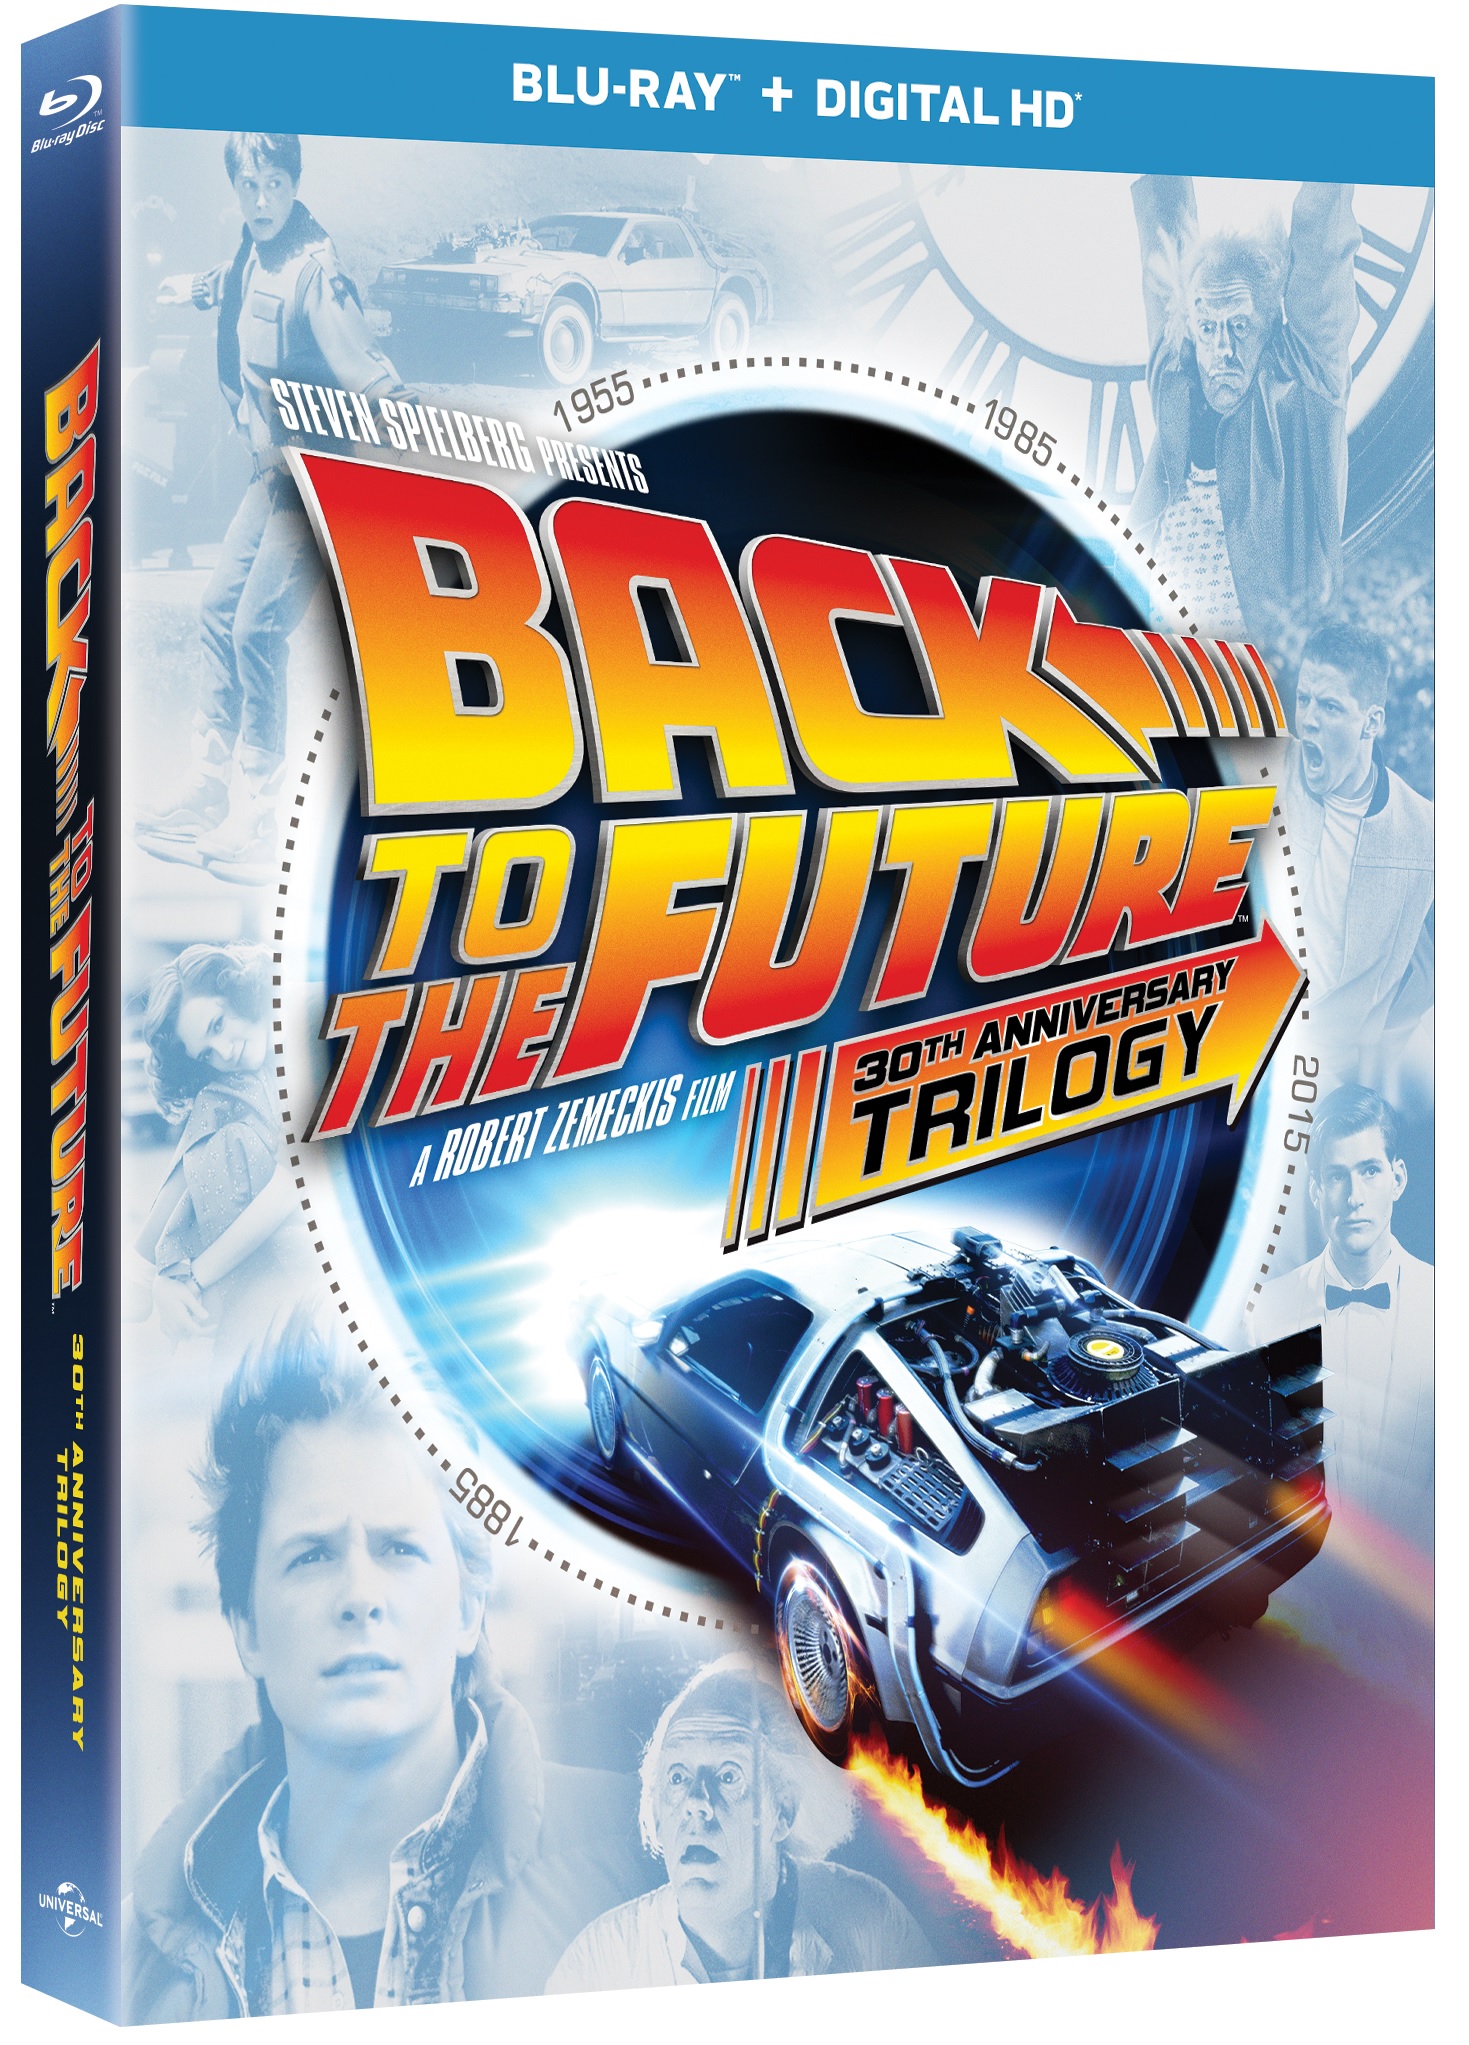 Back to The Future 30 Anniversary Trilogy Blu-ray Review